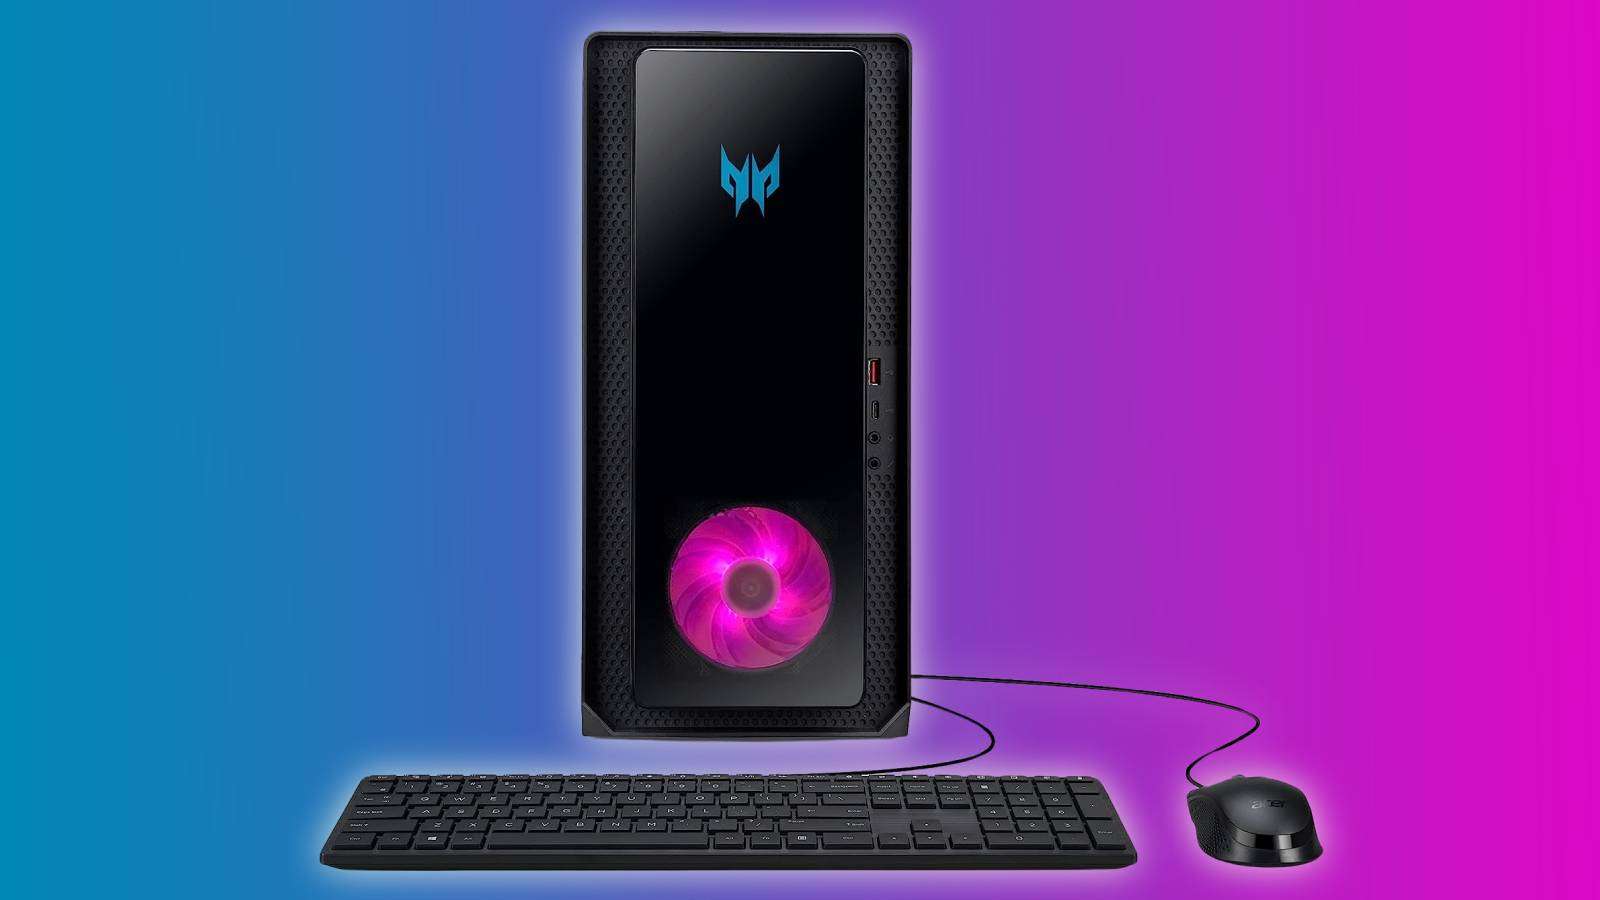 Image of the Acer Predator gaming PC, with a pink and blue background.